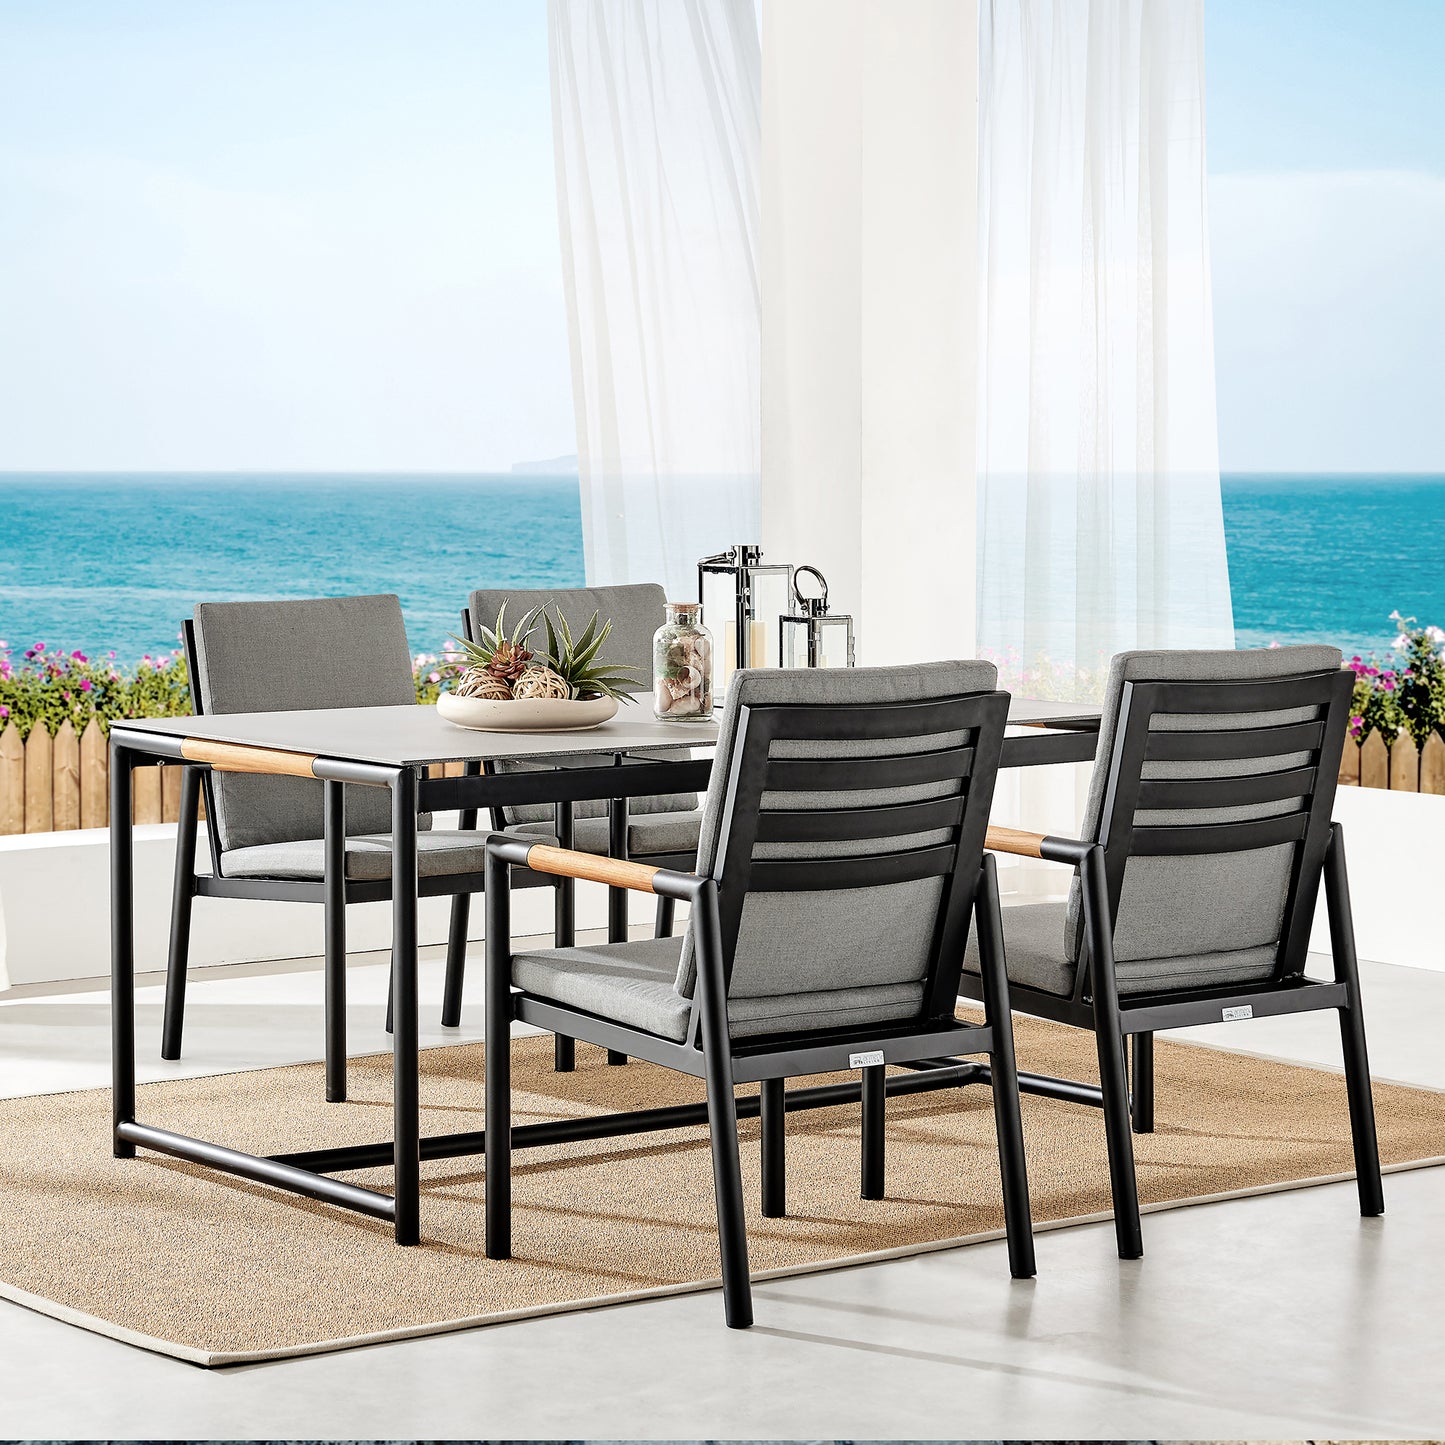 Crown 5 Piece Black Aluminum and Teak Outdoor Dining Set with Dark Gray Fabric